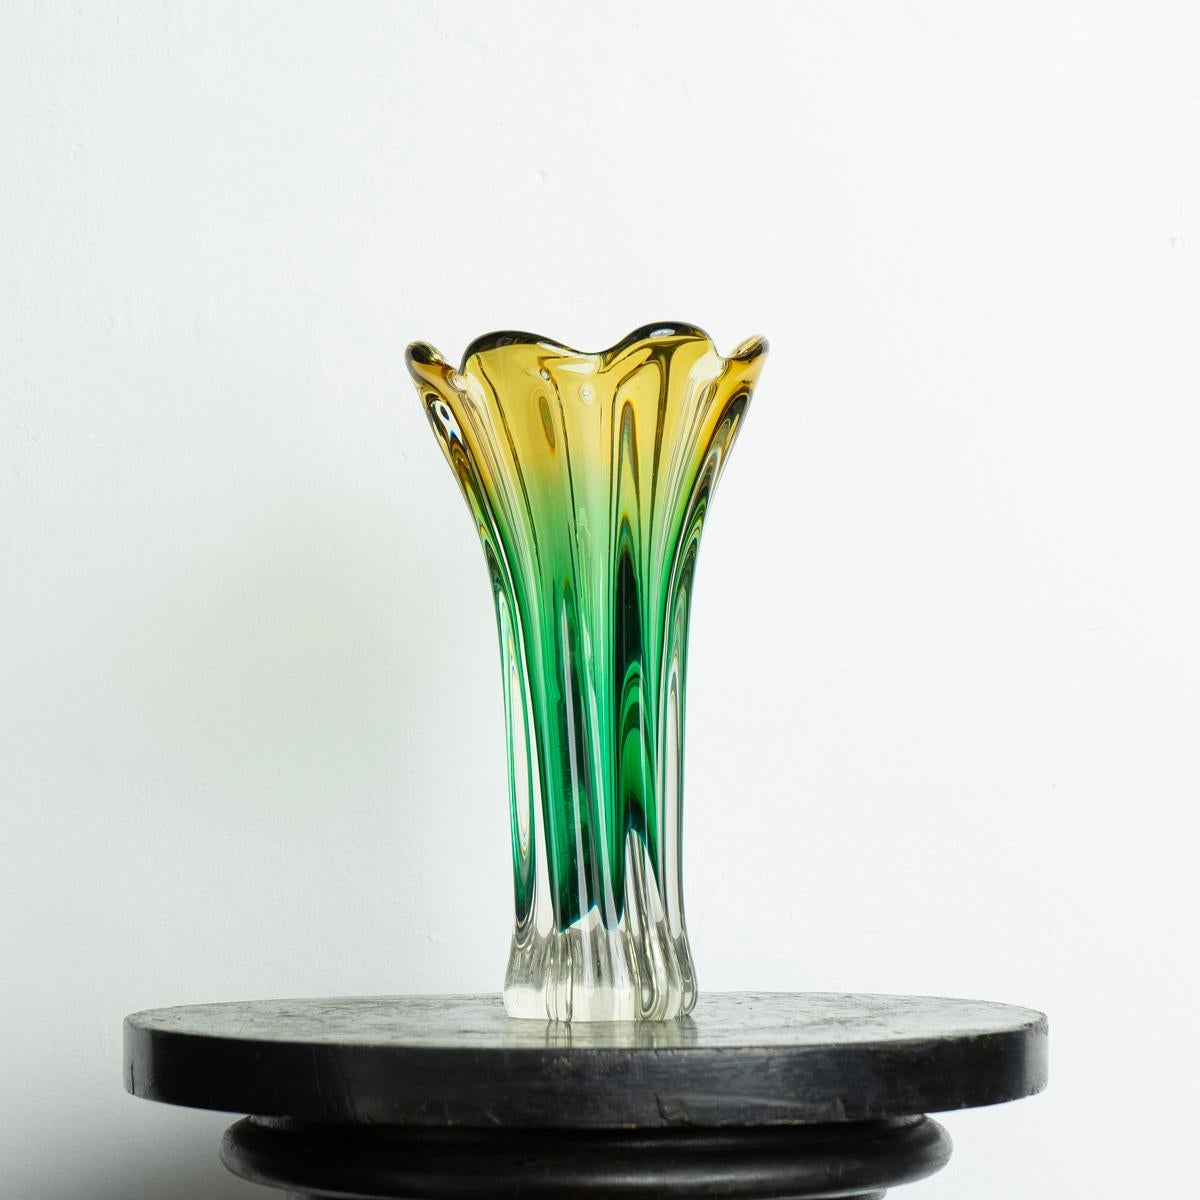 Blown Glass Collection of Vintage Freeform Sommerso Murano Glass Vases, C. 1960s